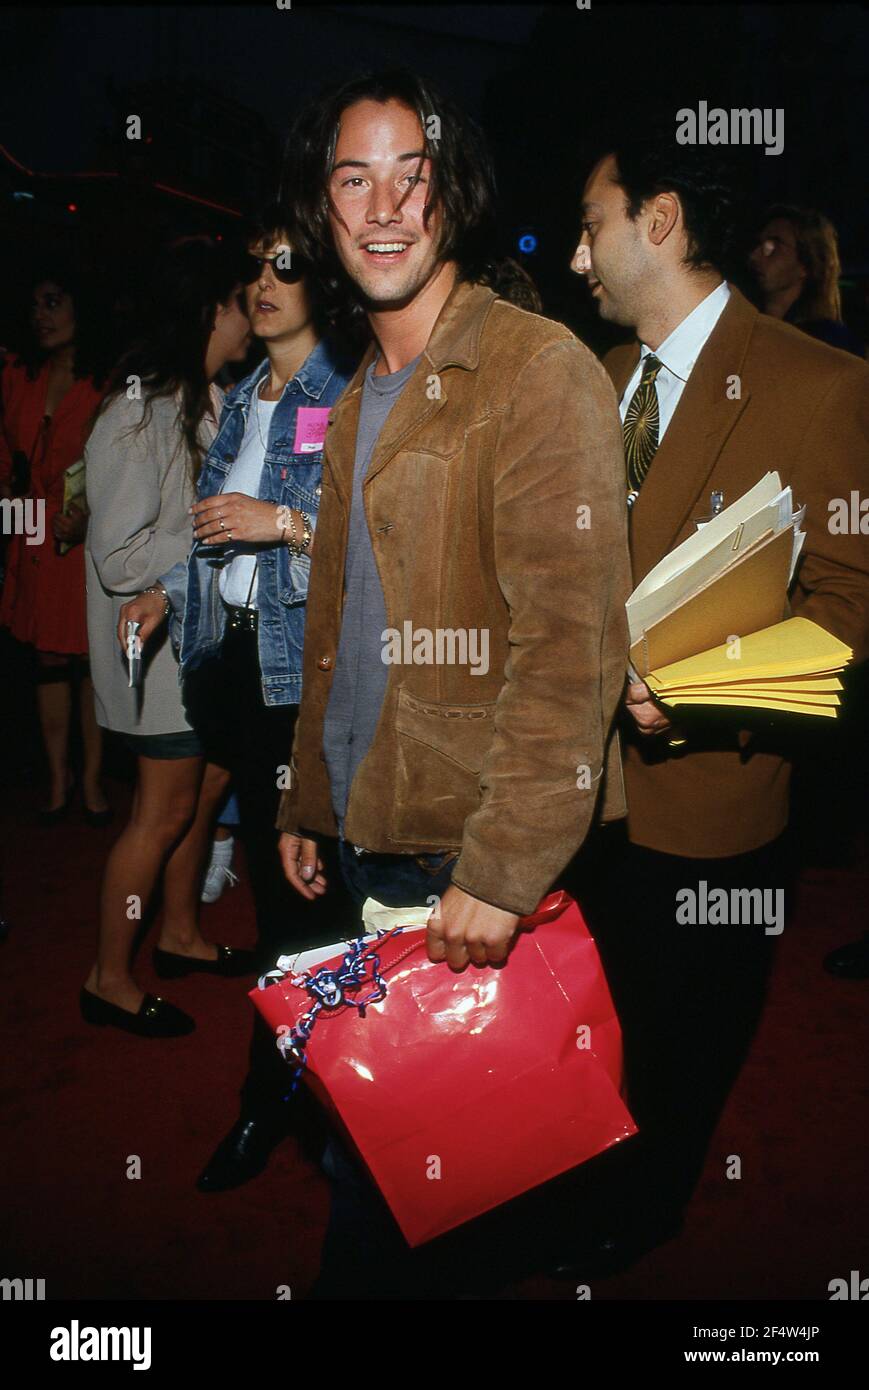 HOLLYWOOD, CA - JULY 18: Keanu Reeves at the premiere of 'Bill and Ted's Bogus Journey' on July 18, 1991 at the Mann Chinese Theater in Hollywood, California Credit: Ralph Dominguez/MediaPunch Stock Photo